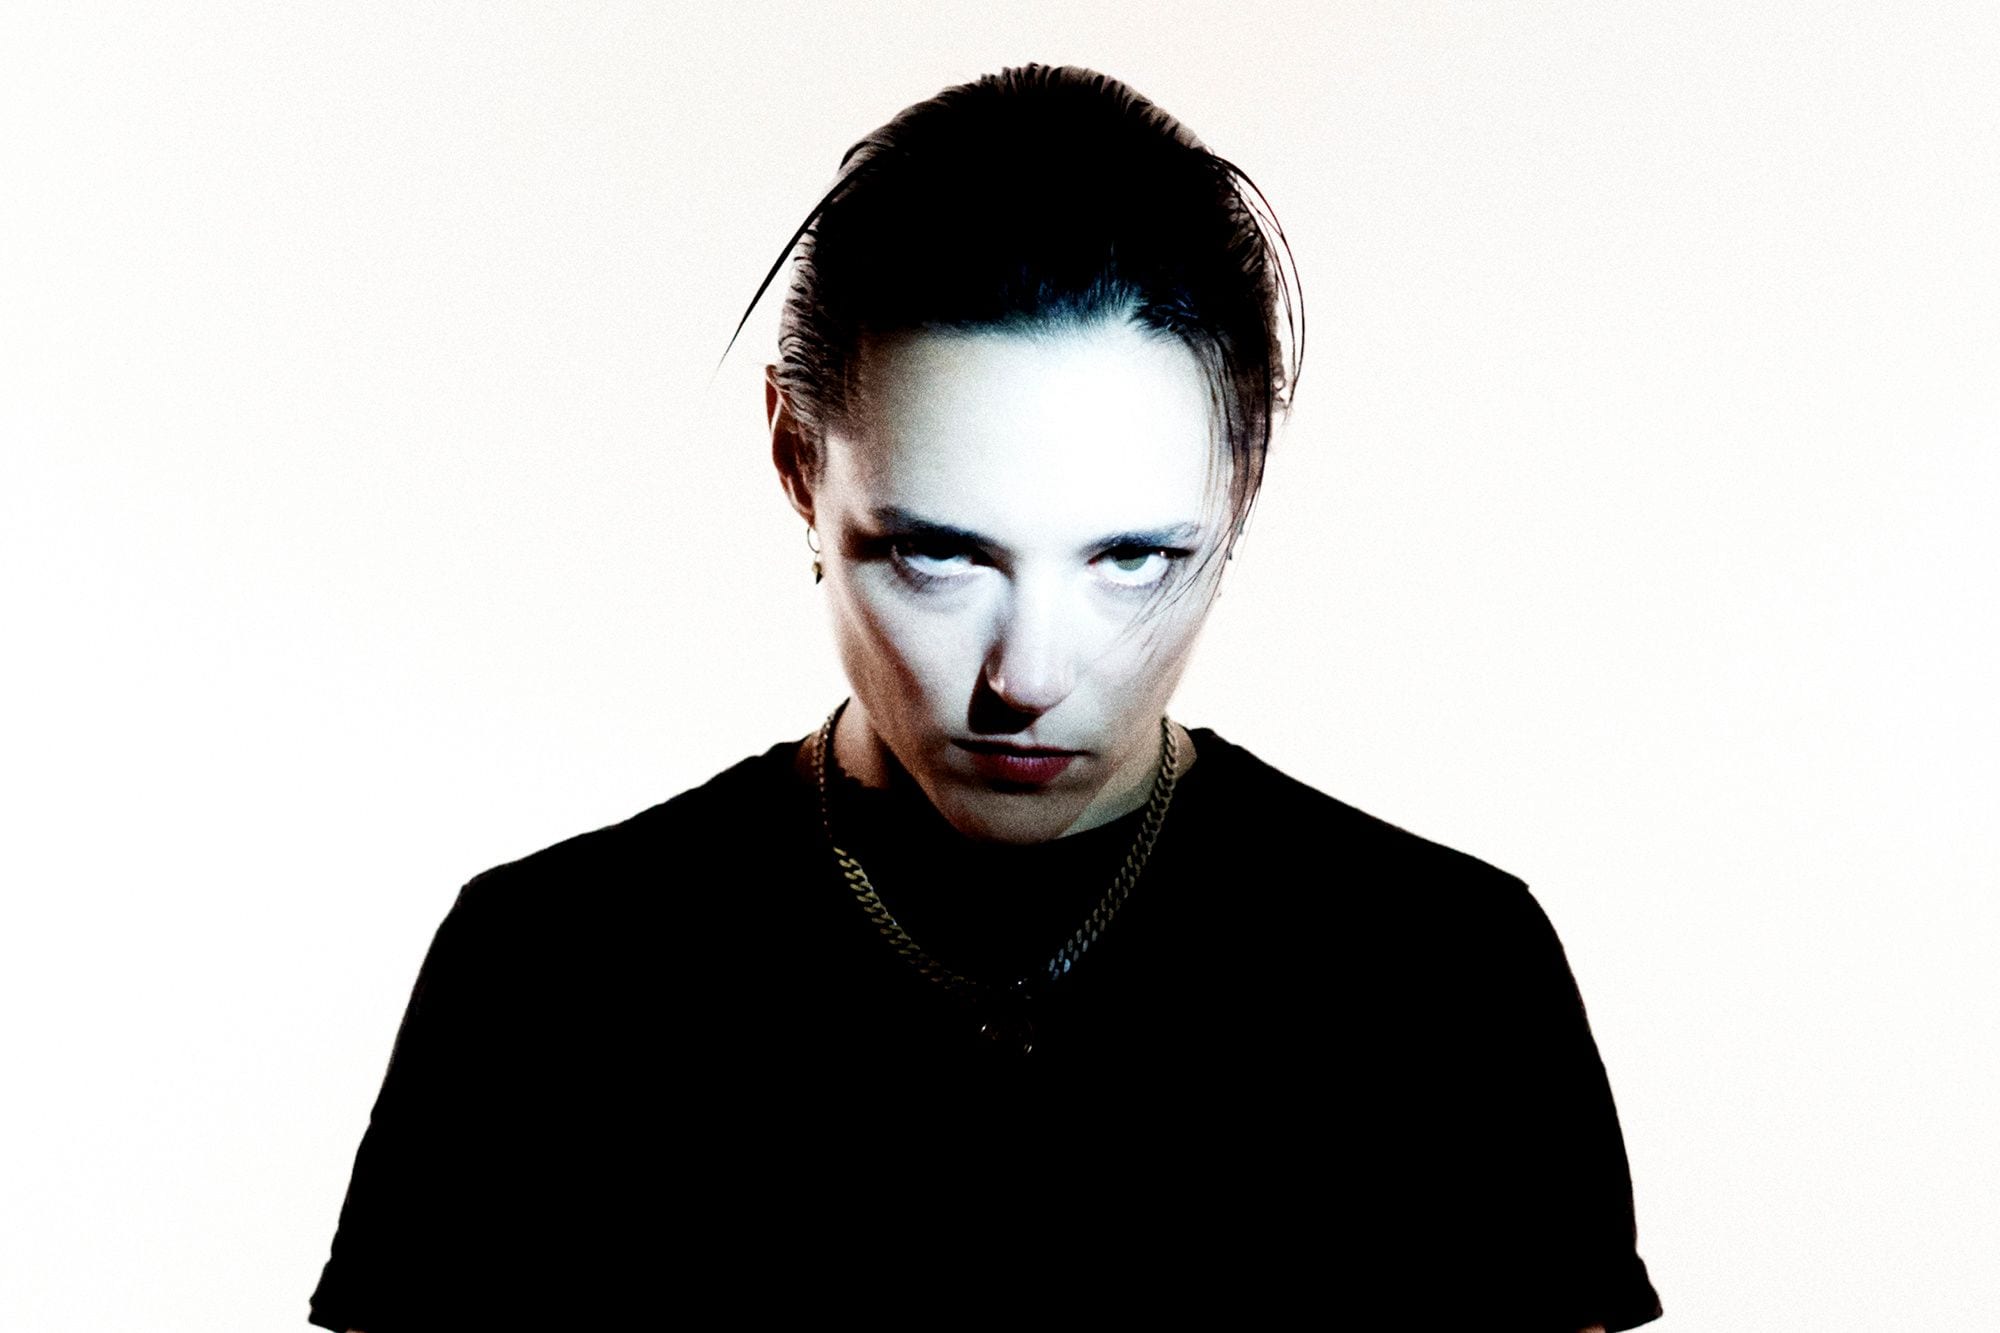 Savages’ Jehnny Beth Creates One of the Most Compelling Albums of 2020 with ‘To Love Is to Live’